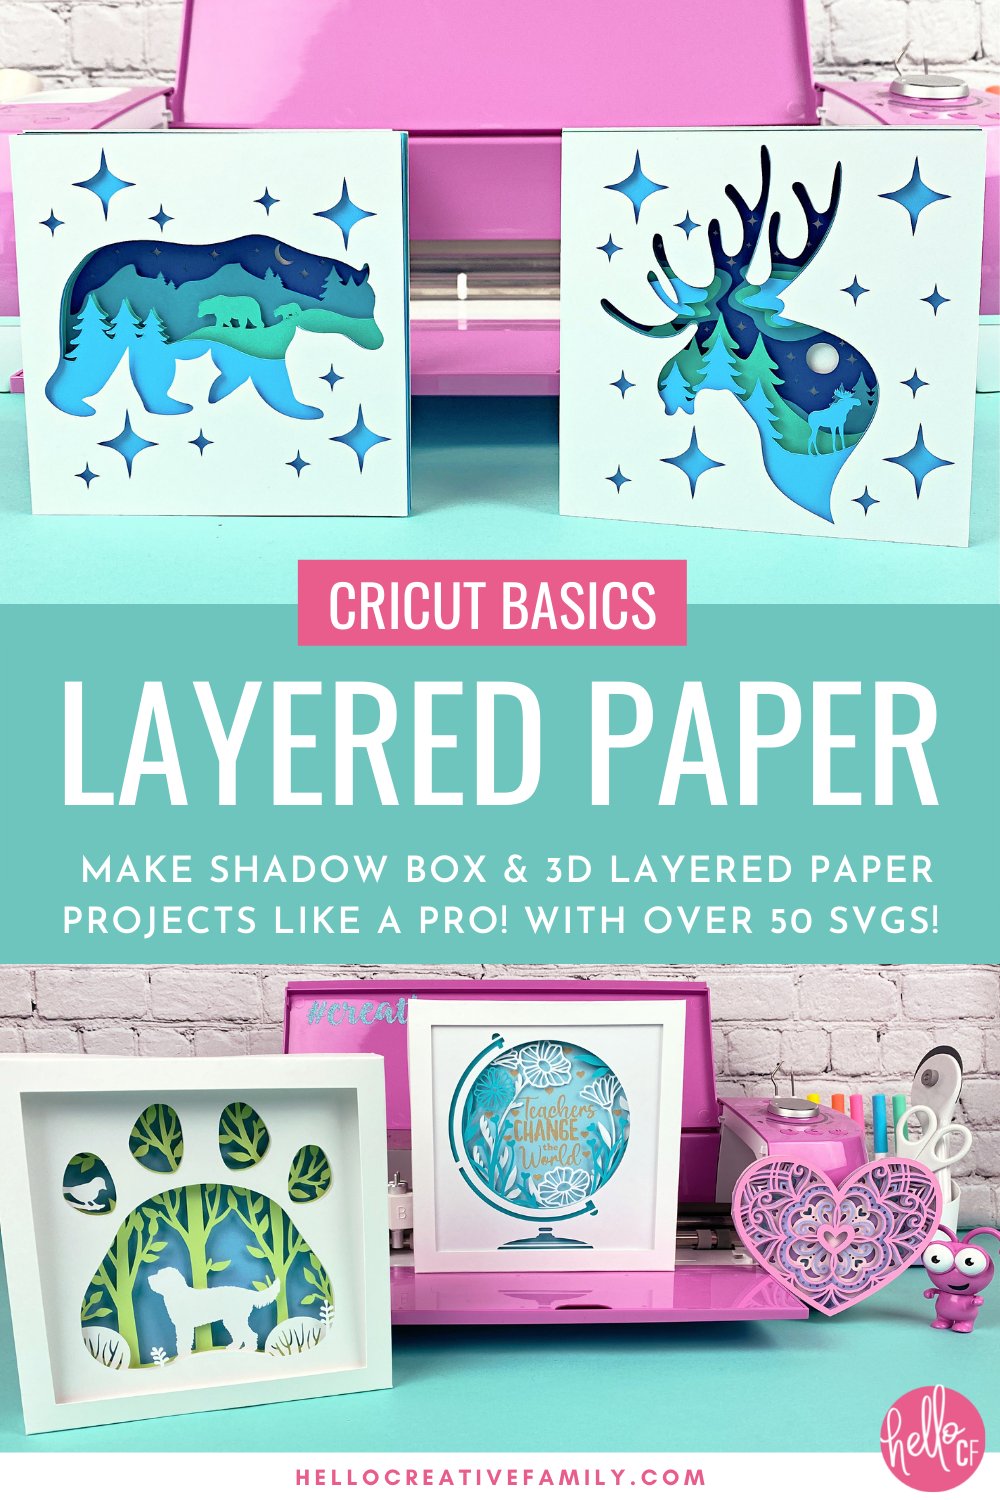 Creating layered paper projects and shadow boxes out of cardstock with your Cricut is one of the most popular Cricut projects! We're sharing a ton of tips, tricks and ideas so that you'll be making 3d layered paper art with your Cricut like a pro! Includes over 50 layered paper project SVGs!